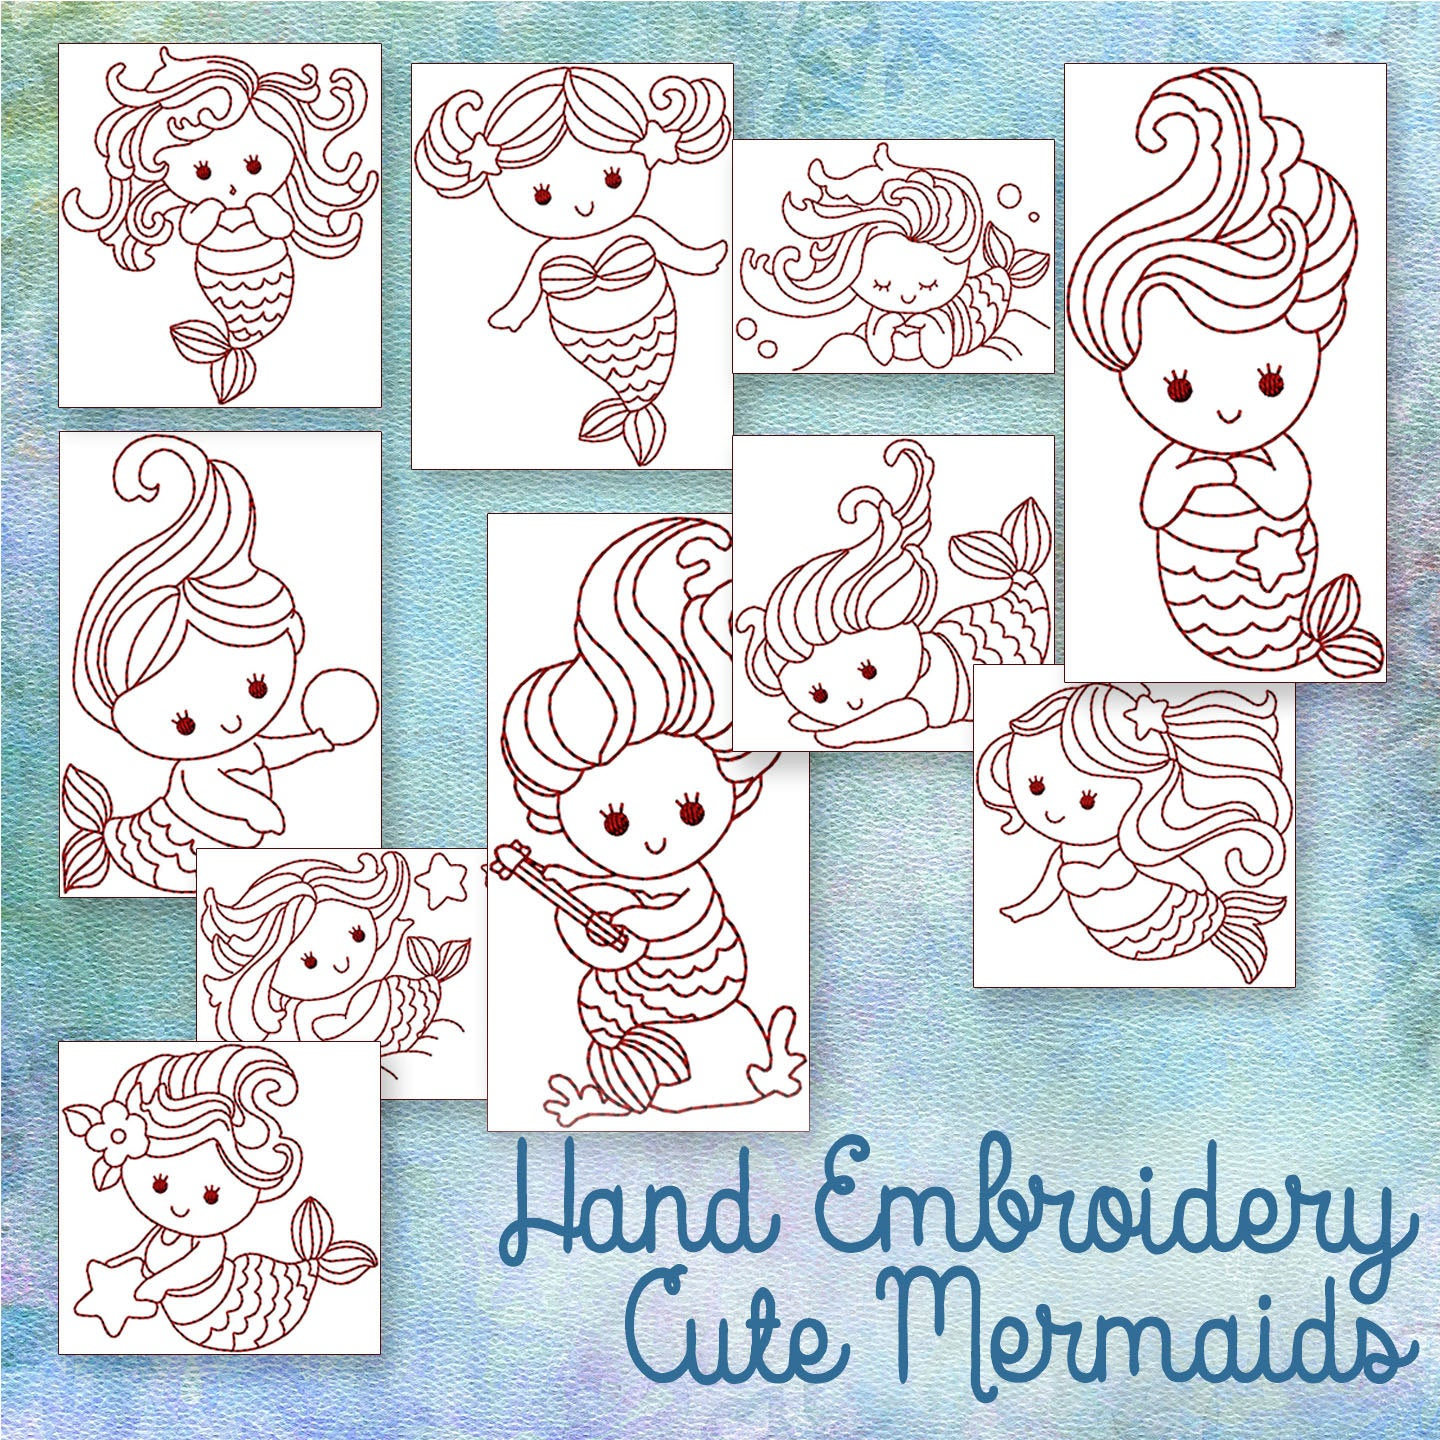 Turkish Embroidery Patterns Sale Hand Embroidery Patterns Redwork Designs Cute Mermaids In 4 Sizes Pdf Instant Download